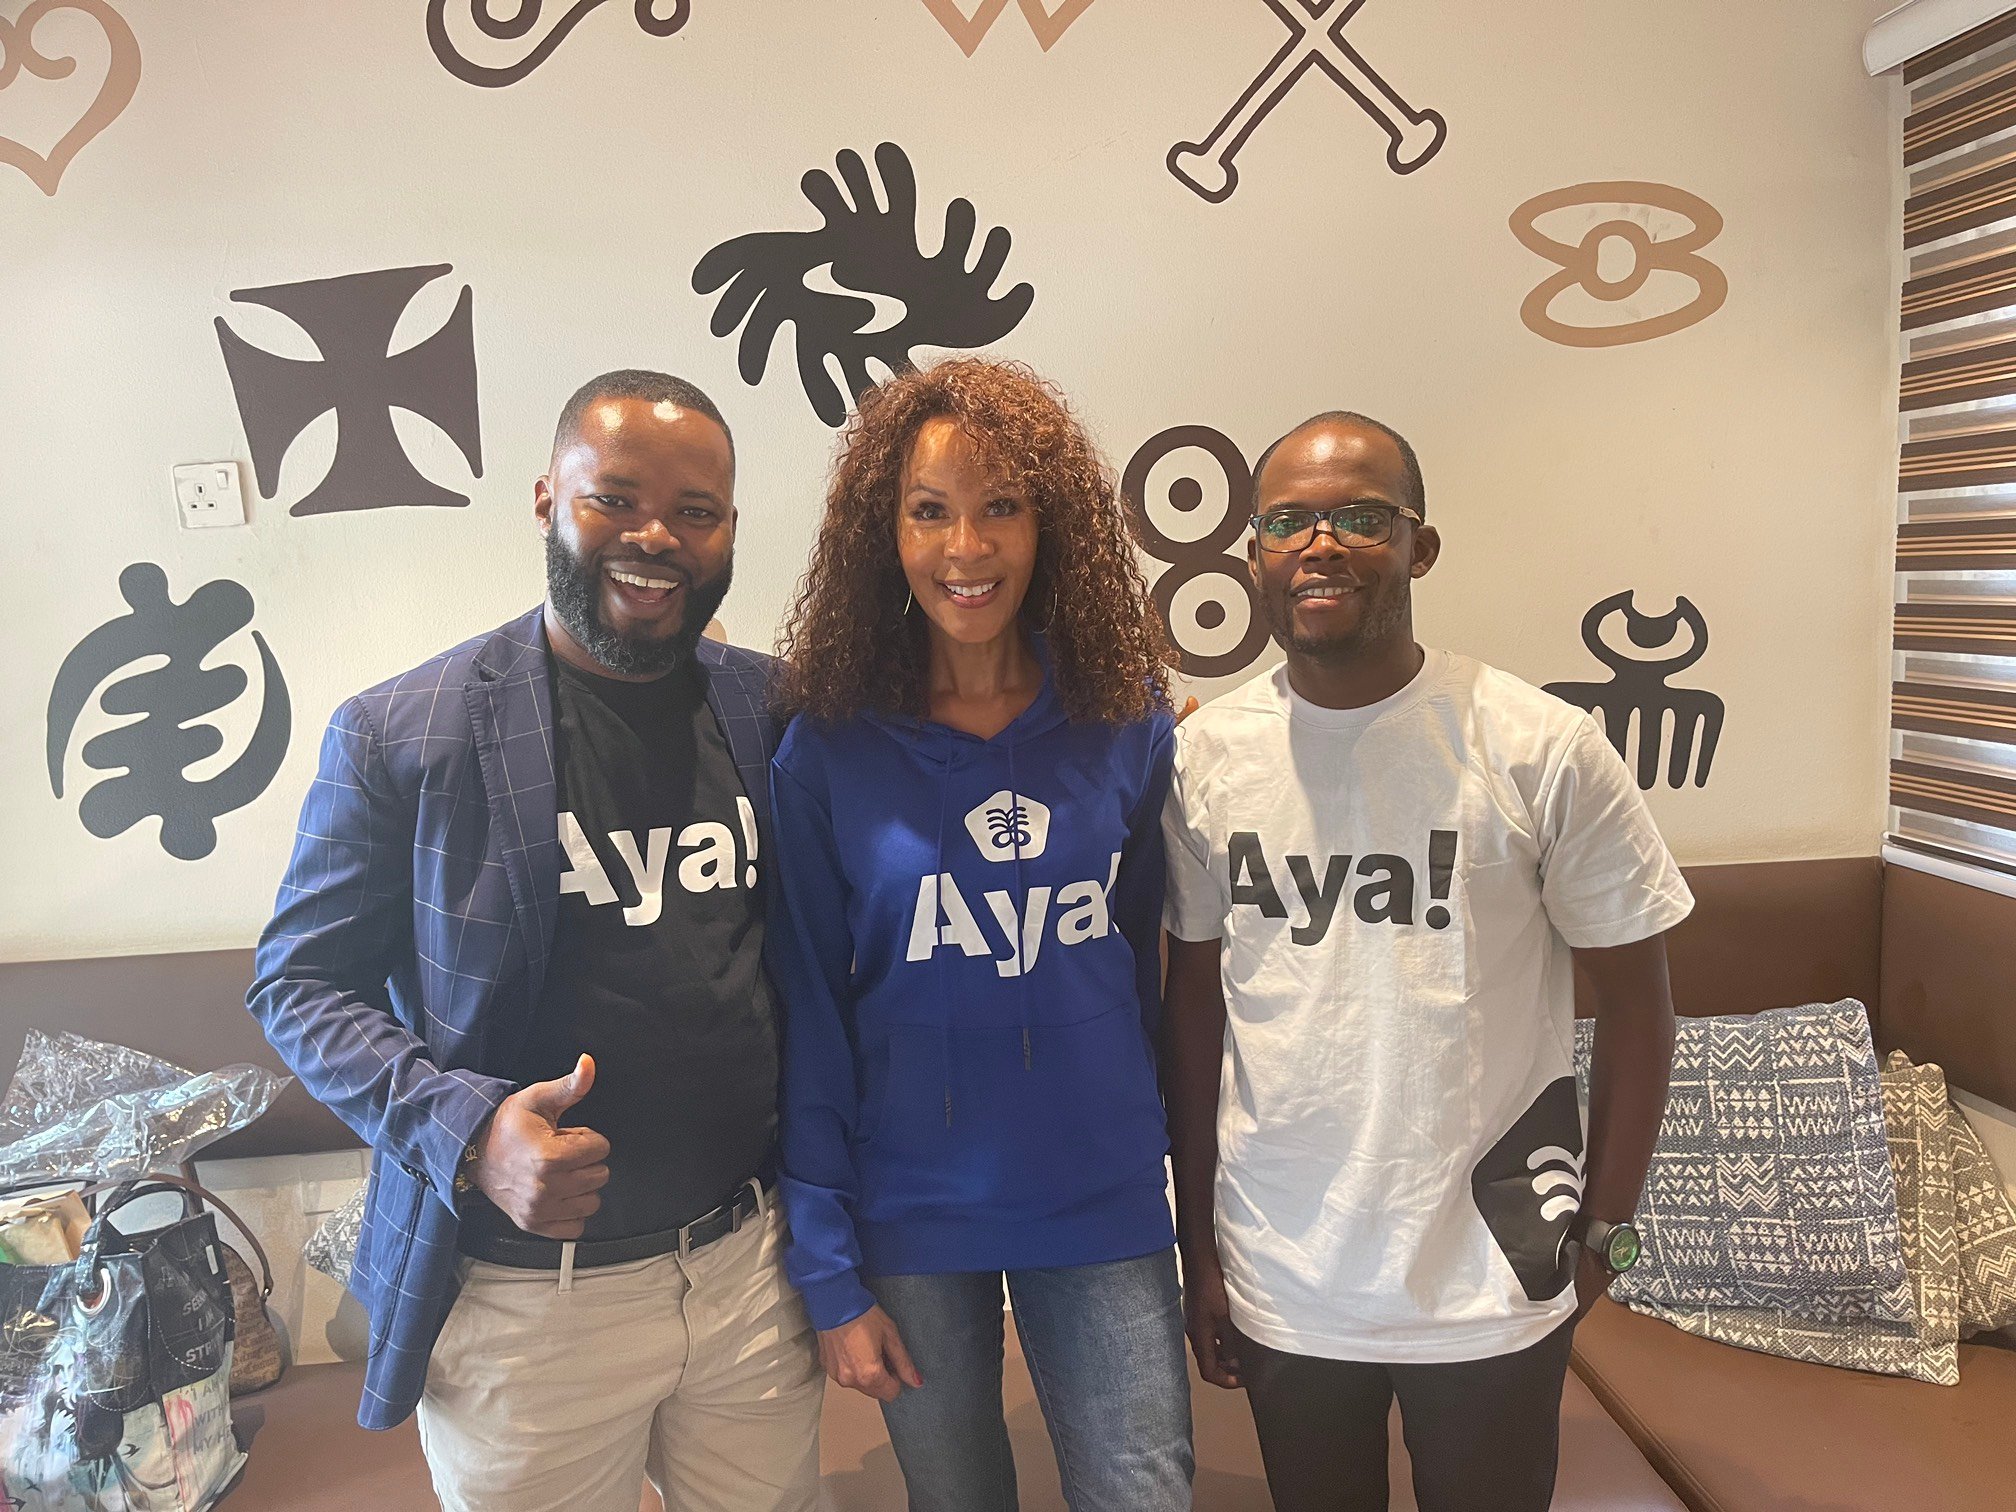 African blockchain innovator Aya is building the Web3 Ghana Empire, a deep dive into how Aya can emerge as West Africa's most exciting crypto project